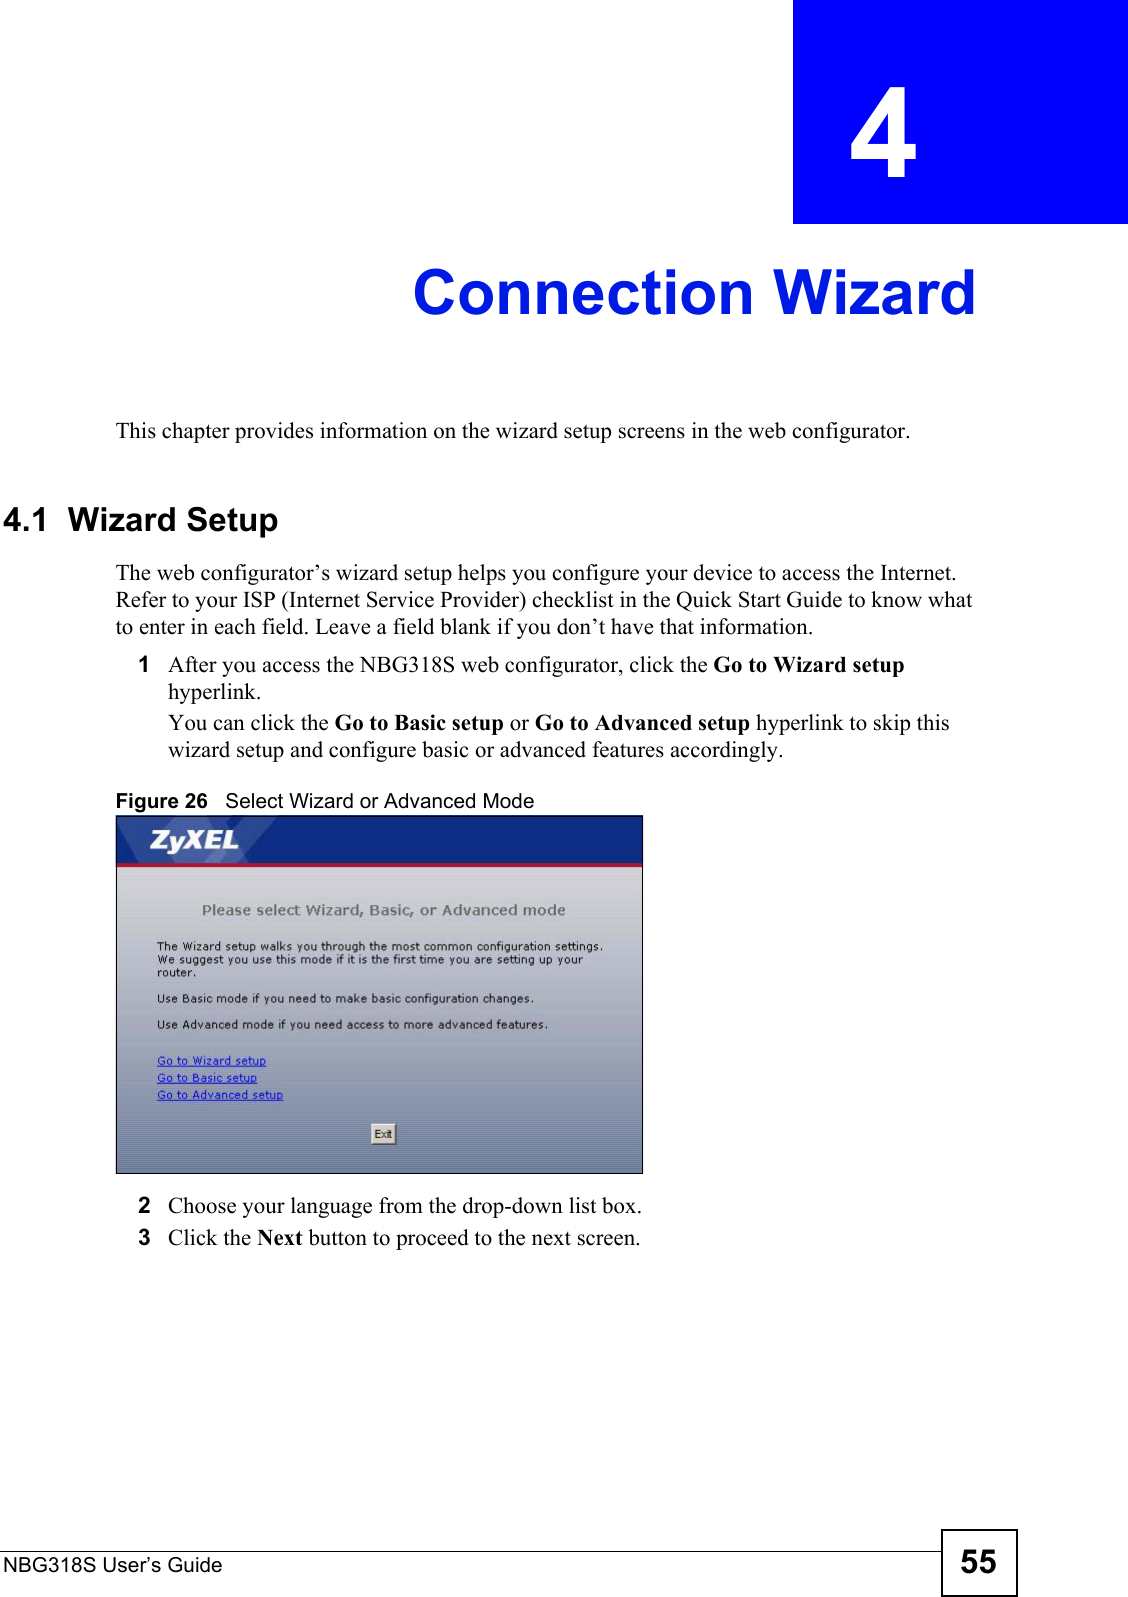 NBG318S User’s Guide 55CHAPTER  4 Connection WizardThis chapter provides information on the wizard setup screens in the web configurator.4.1  Wizard SetupThe web configurator’s wizard setup helps you configure your device to access the Internet. Refer to your ISP (Internet Service Provider) checklist in the Quick Start Guide to know what to enter in each field. Leave a field blank if you don’t have that information.1After you access the NBG318S web configurator, click the Go to Wizard setup hyperlink.You can click the Go to Basic setup or Go to Advanced setup hyperlink to skip this wizard setup and configure basic or advanced features accordingly.Figure 26   Select Wizard or Advanced Mode2Choose your language from the drop-down list box.3Click the Next button to proceed to the next screen.